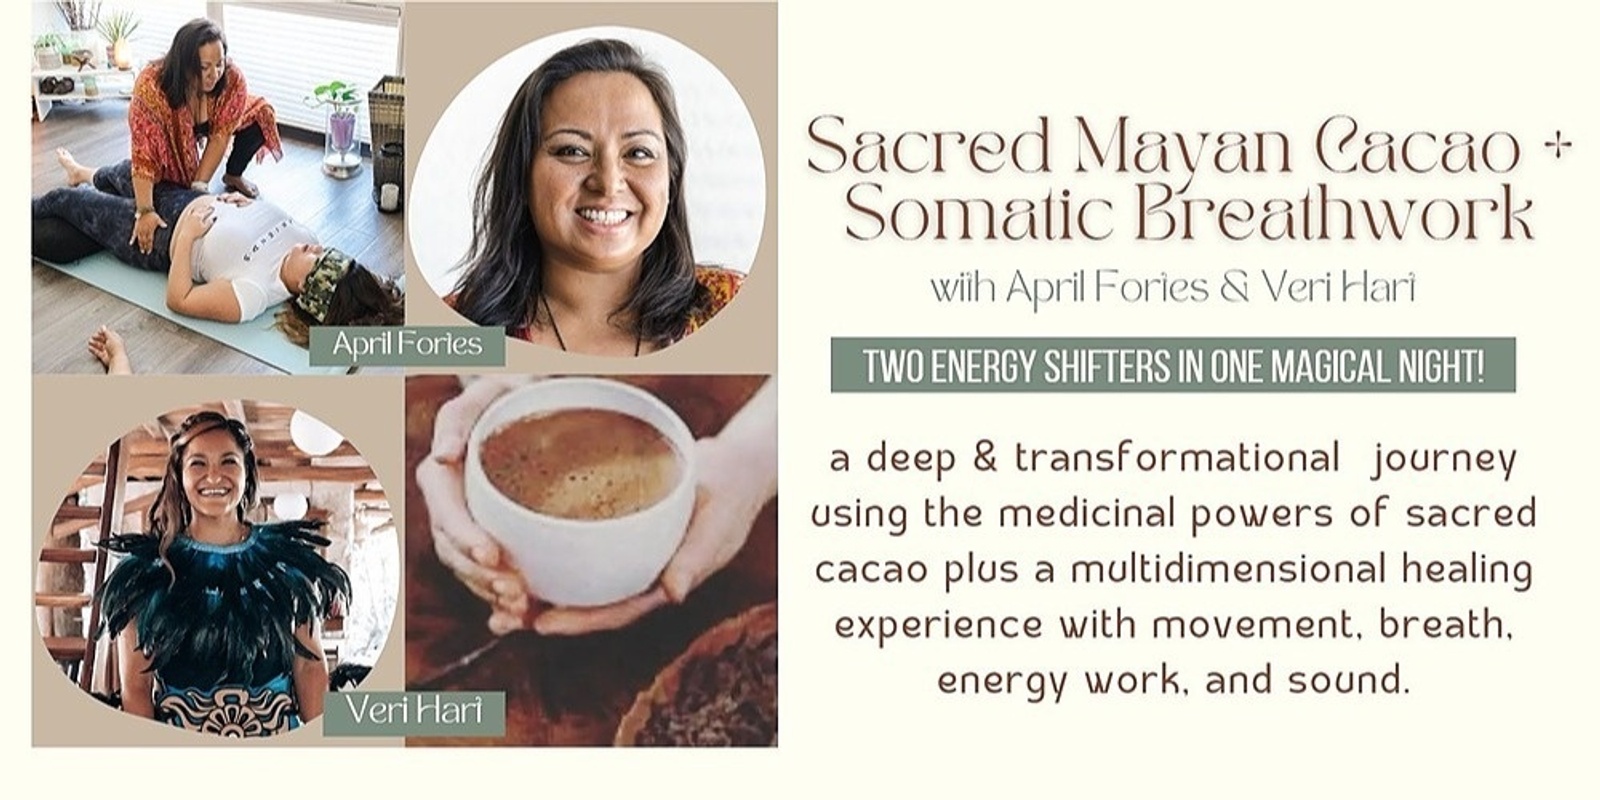 Banner image for 6/30 - Sacred Mayan Cacao + Somatic Breathwork Journey - Tustin